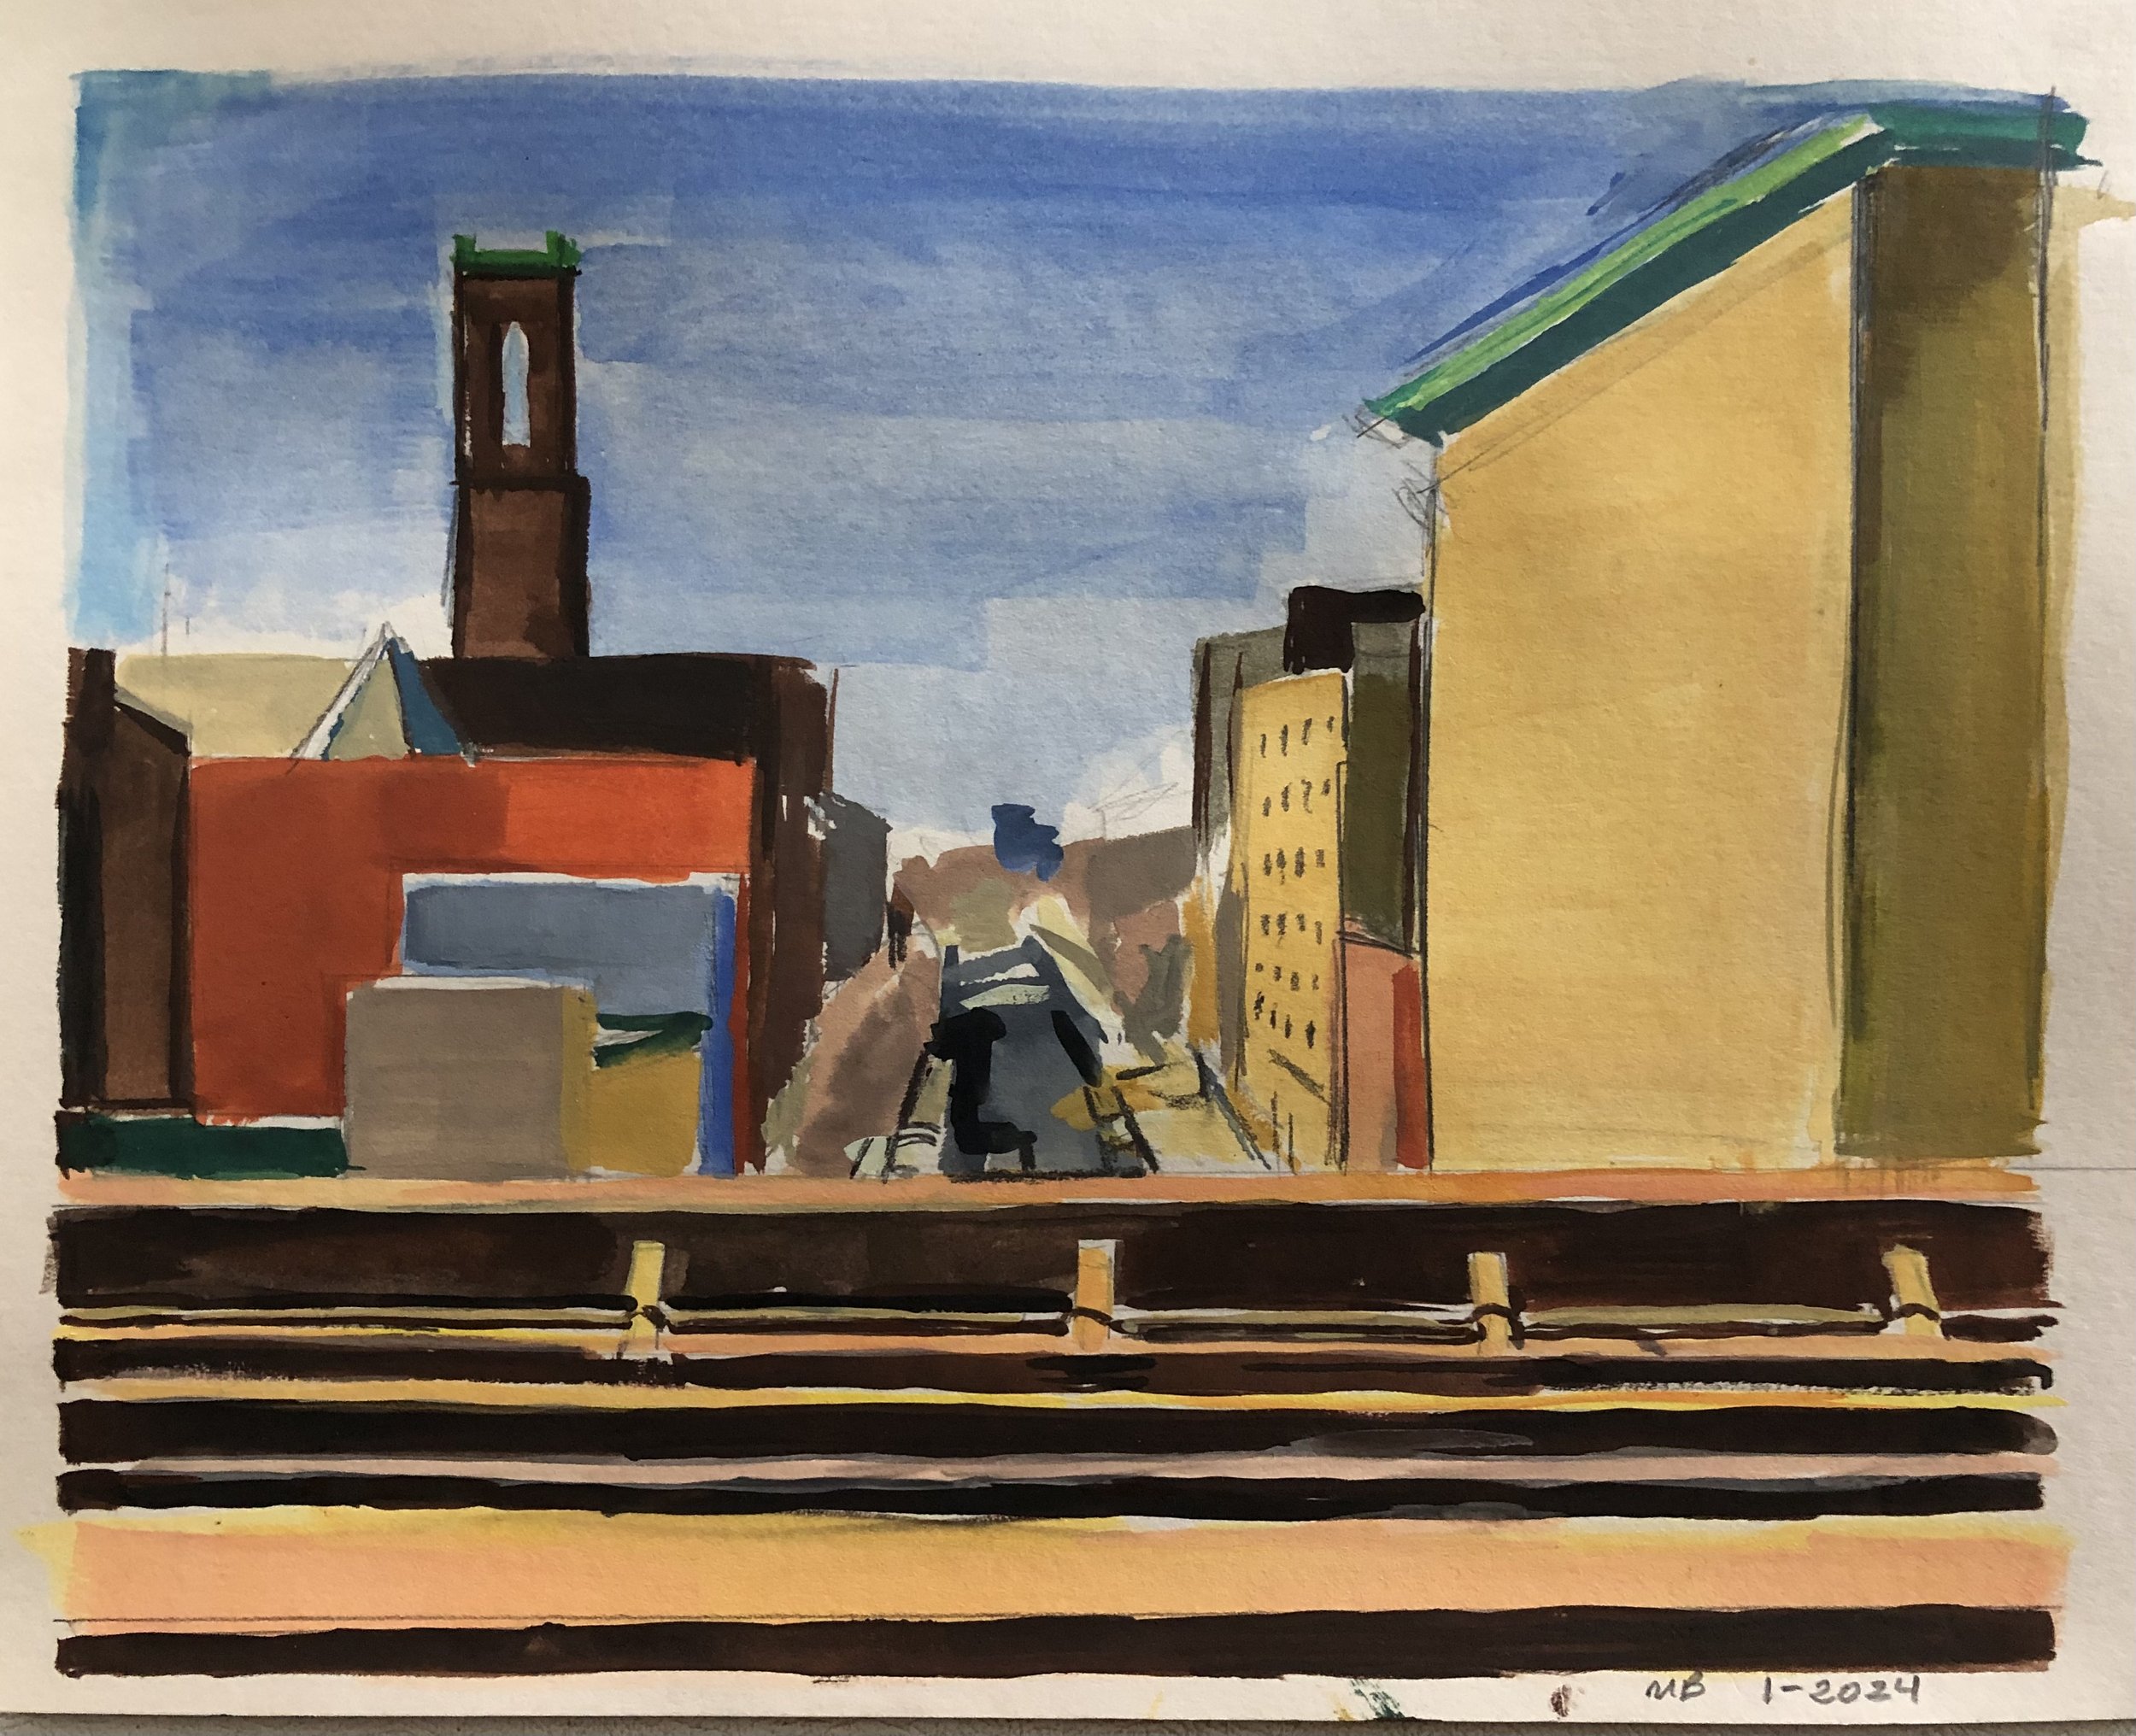    129th Street from the Metro North Train,   Japanese watercolor, 7 ⅝ x 9 ½ in, 2024    